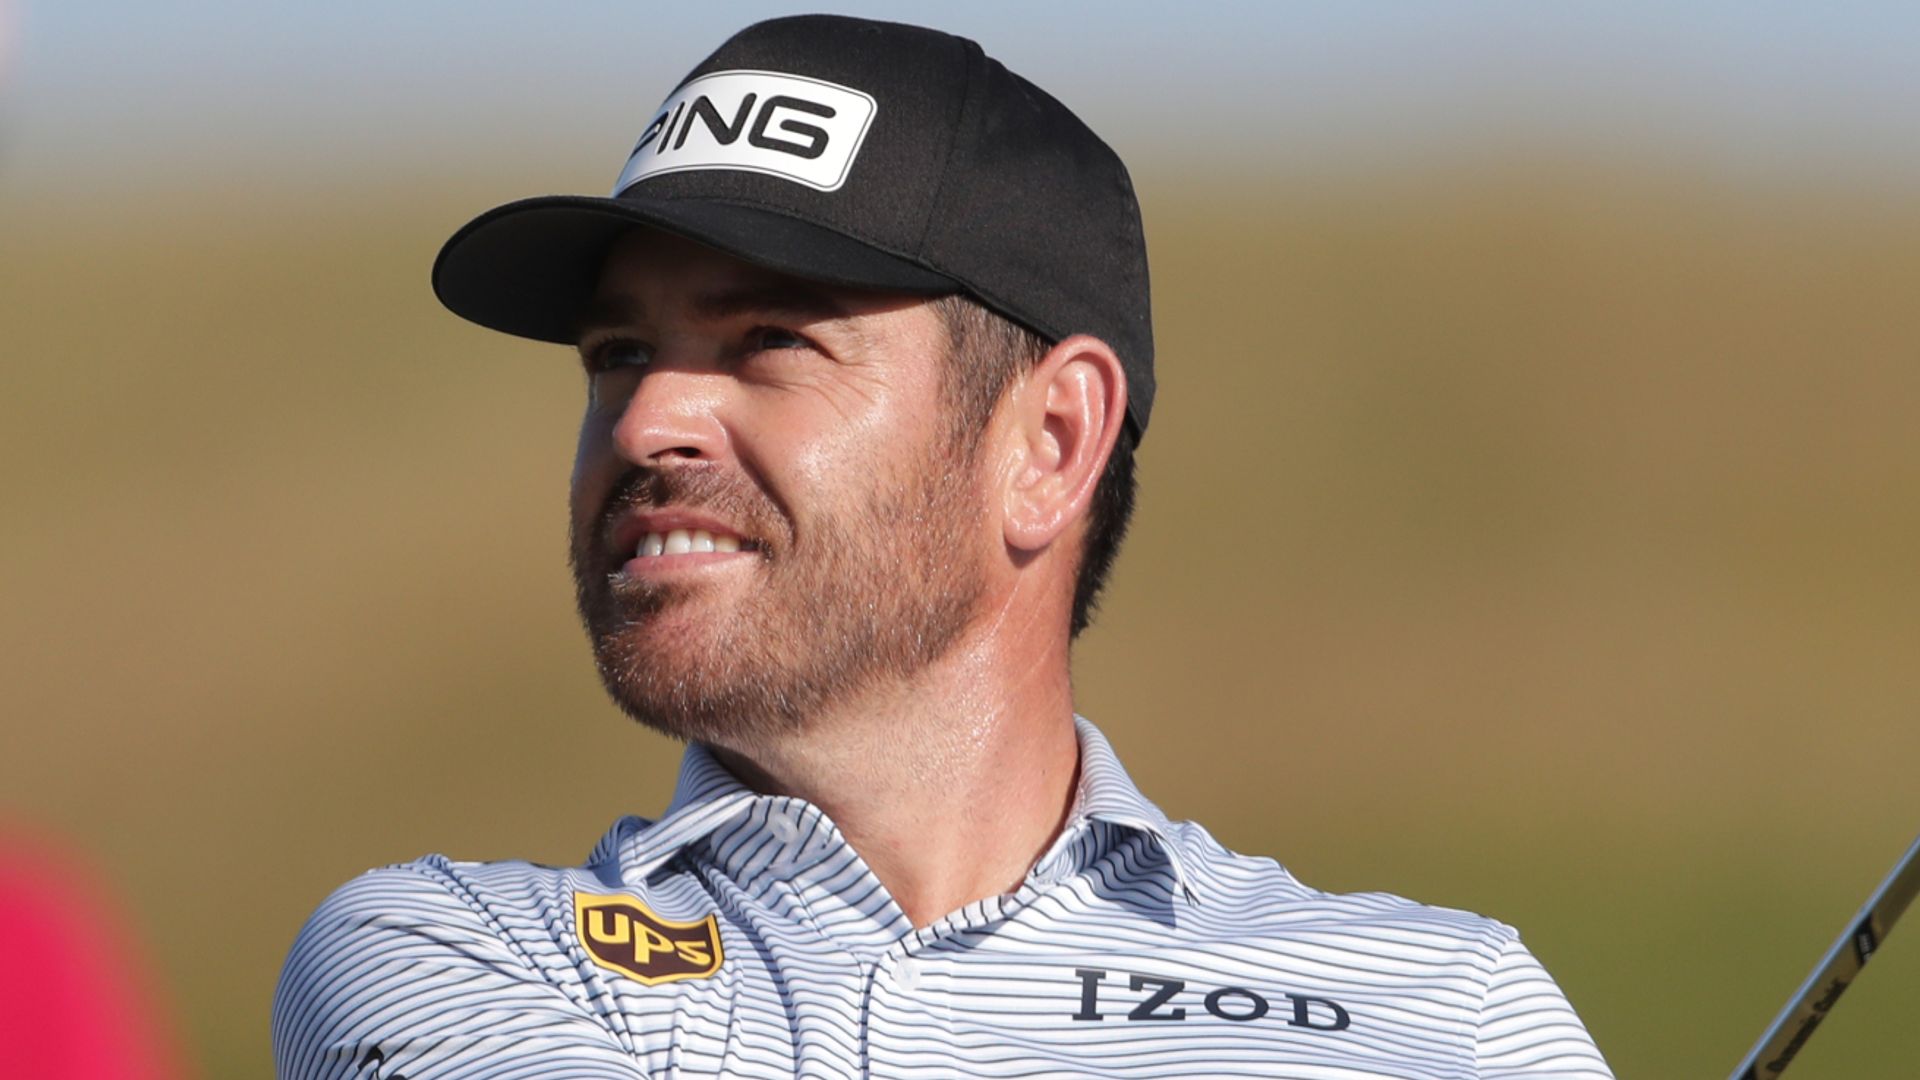 Oosthuizen: Pin positions 'very questionable'